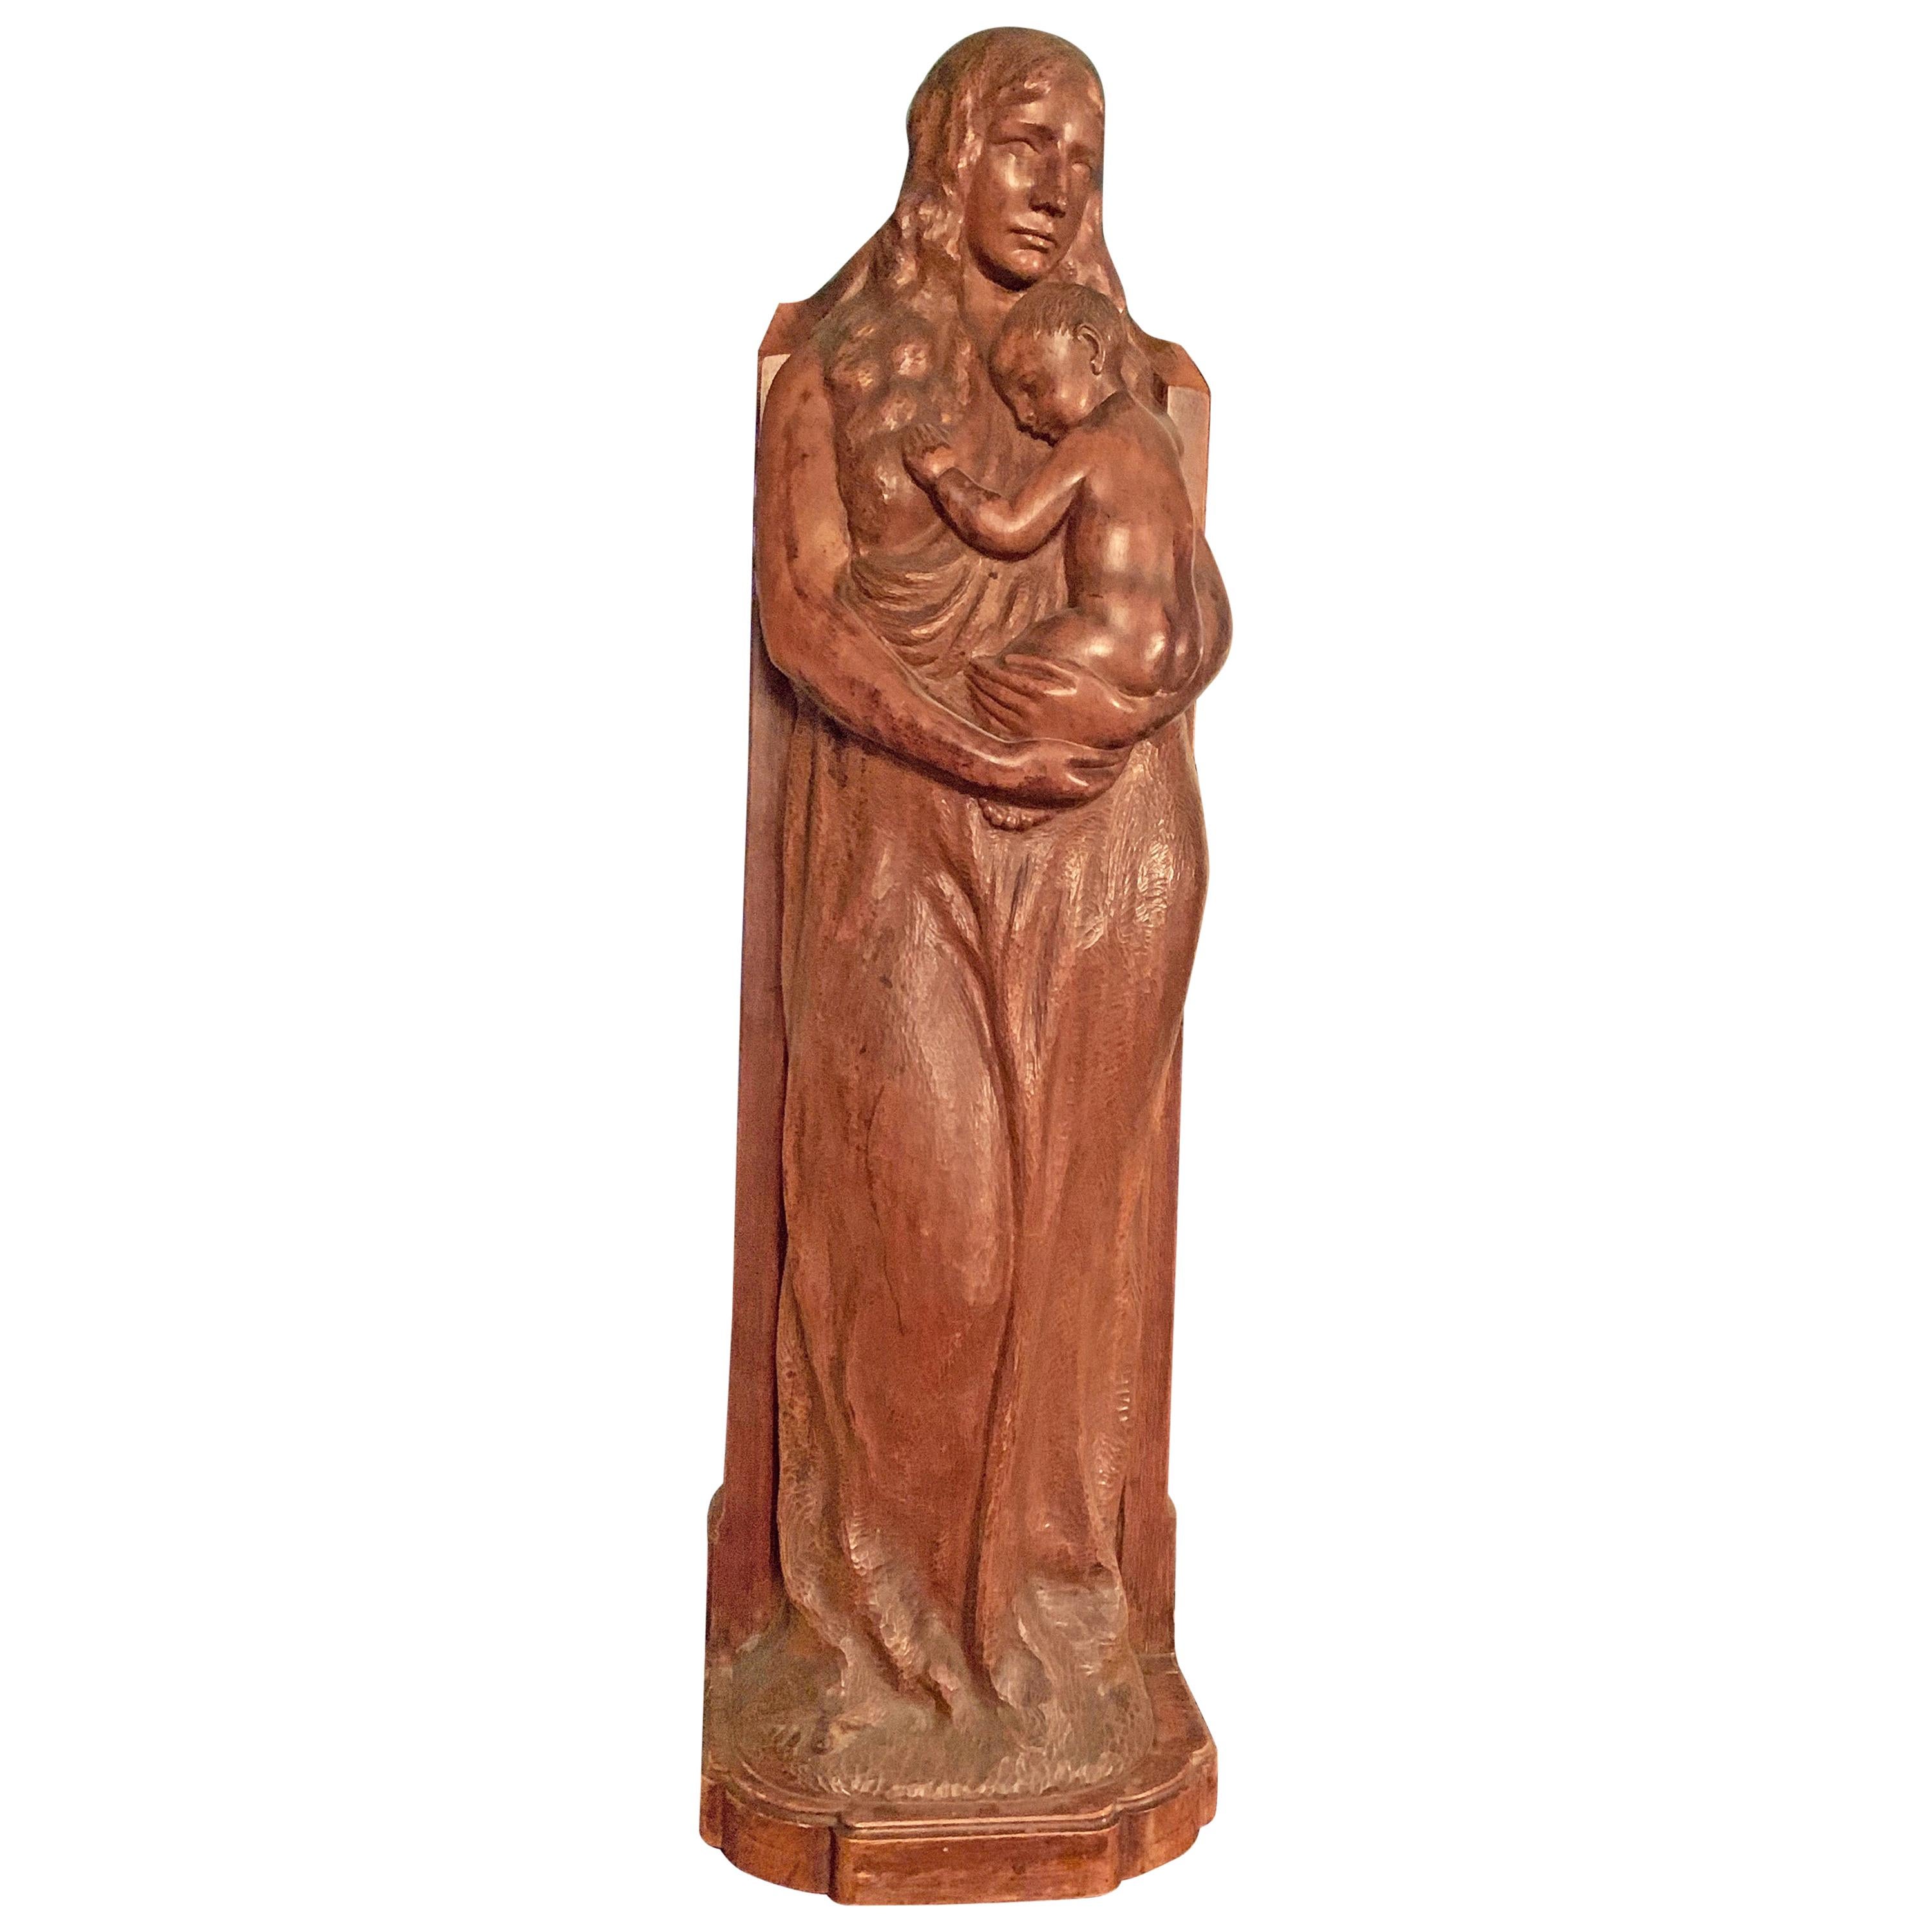 "Woman and Child, " Logan Medal-Winning, Large Mahogany Sculpture by Zettler For Sale